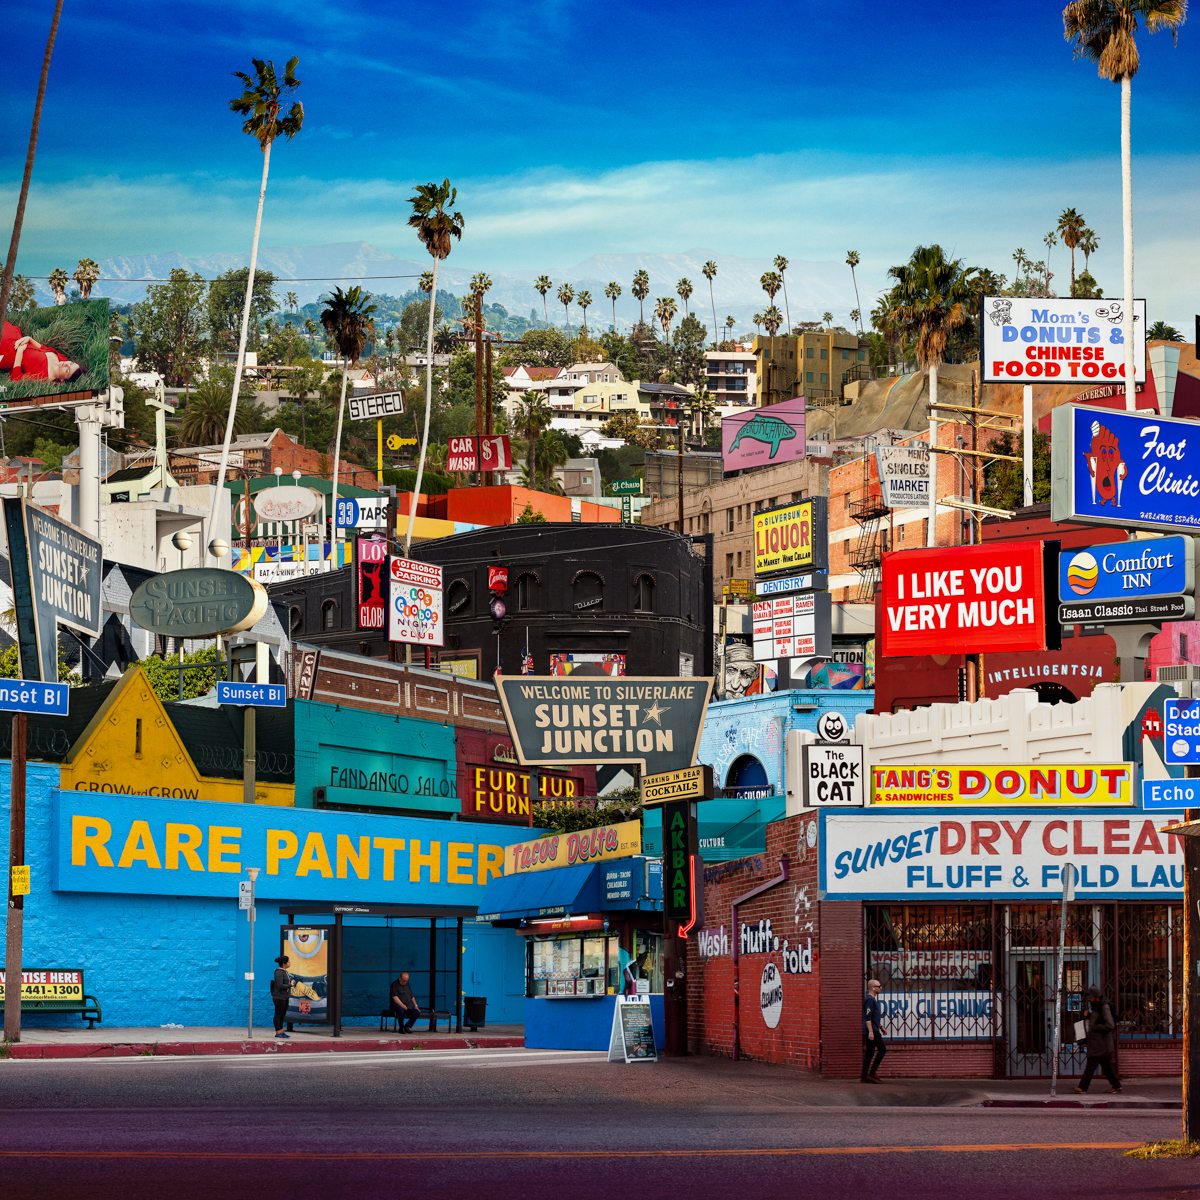 Exploring Los Angeles through the cities and neighborhoods that